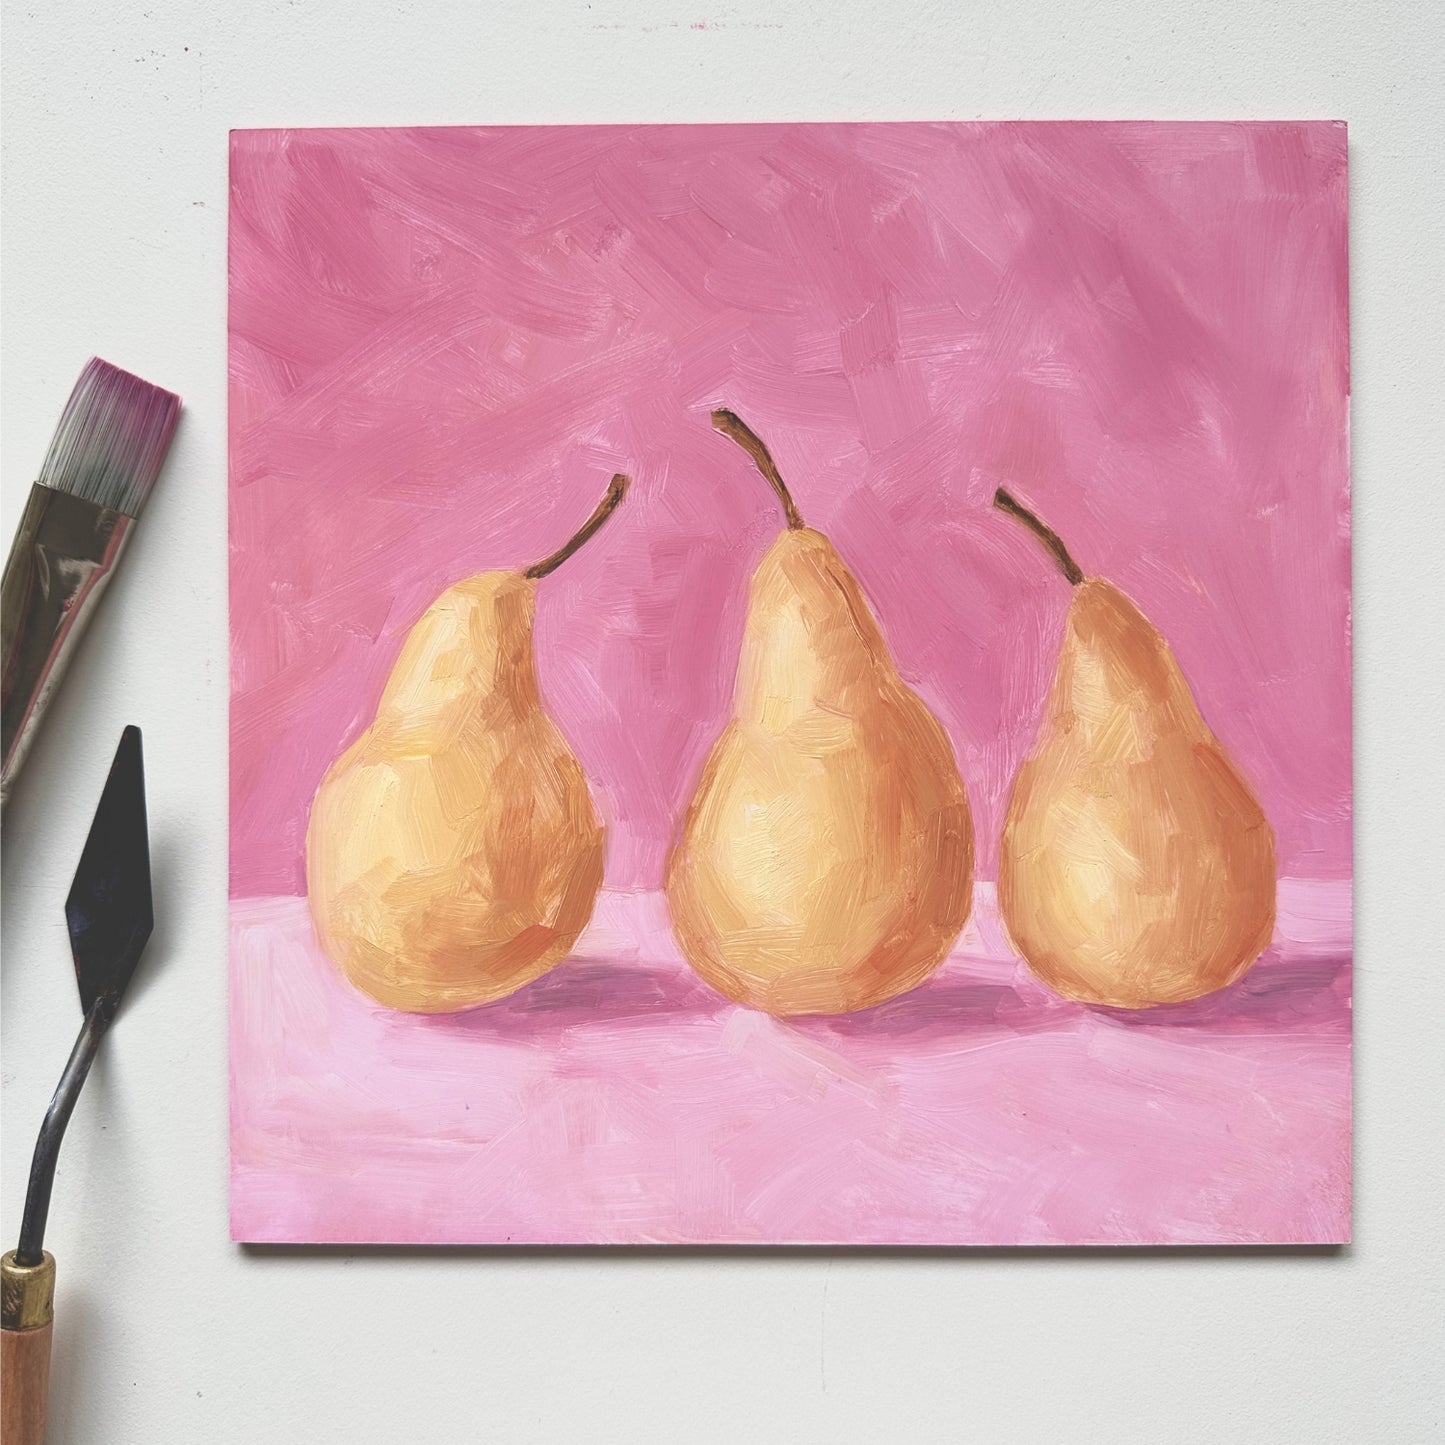 Soft and Creamy Pears